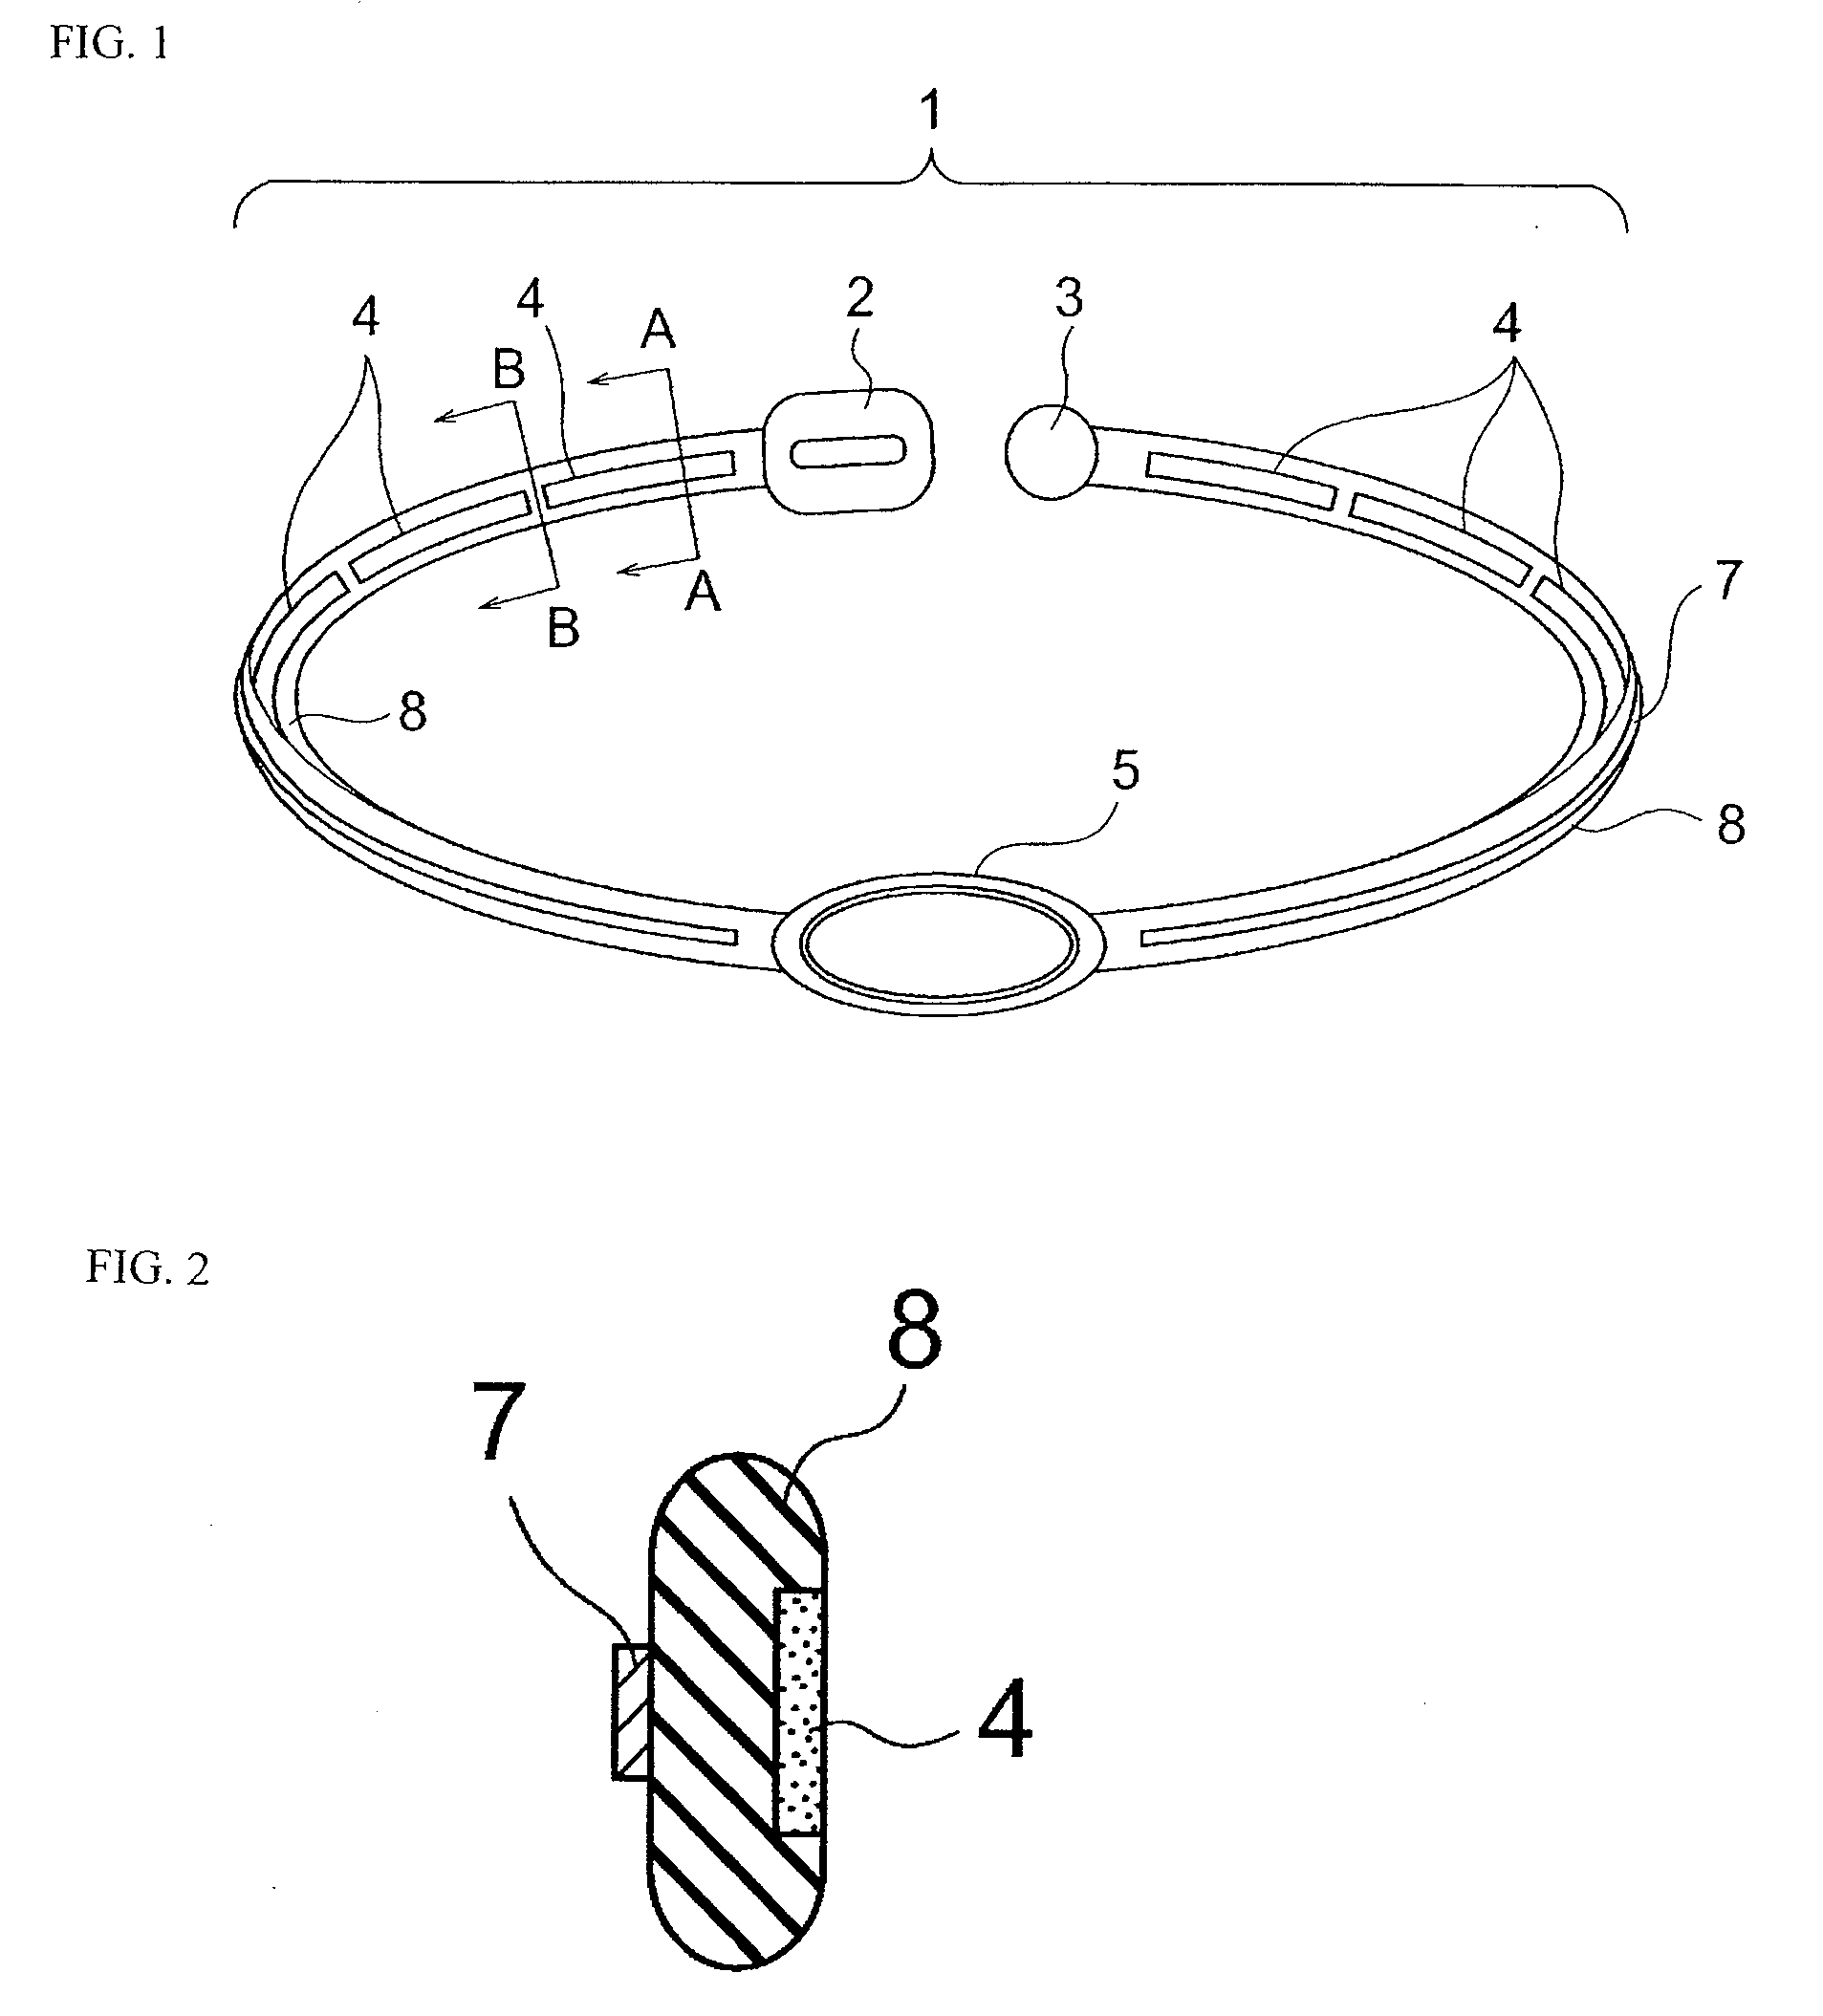 Health Jewelry Utilizing Silicone Elastomer and Process for Producing the Same